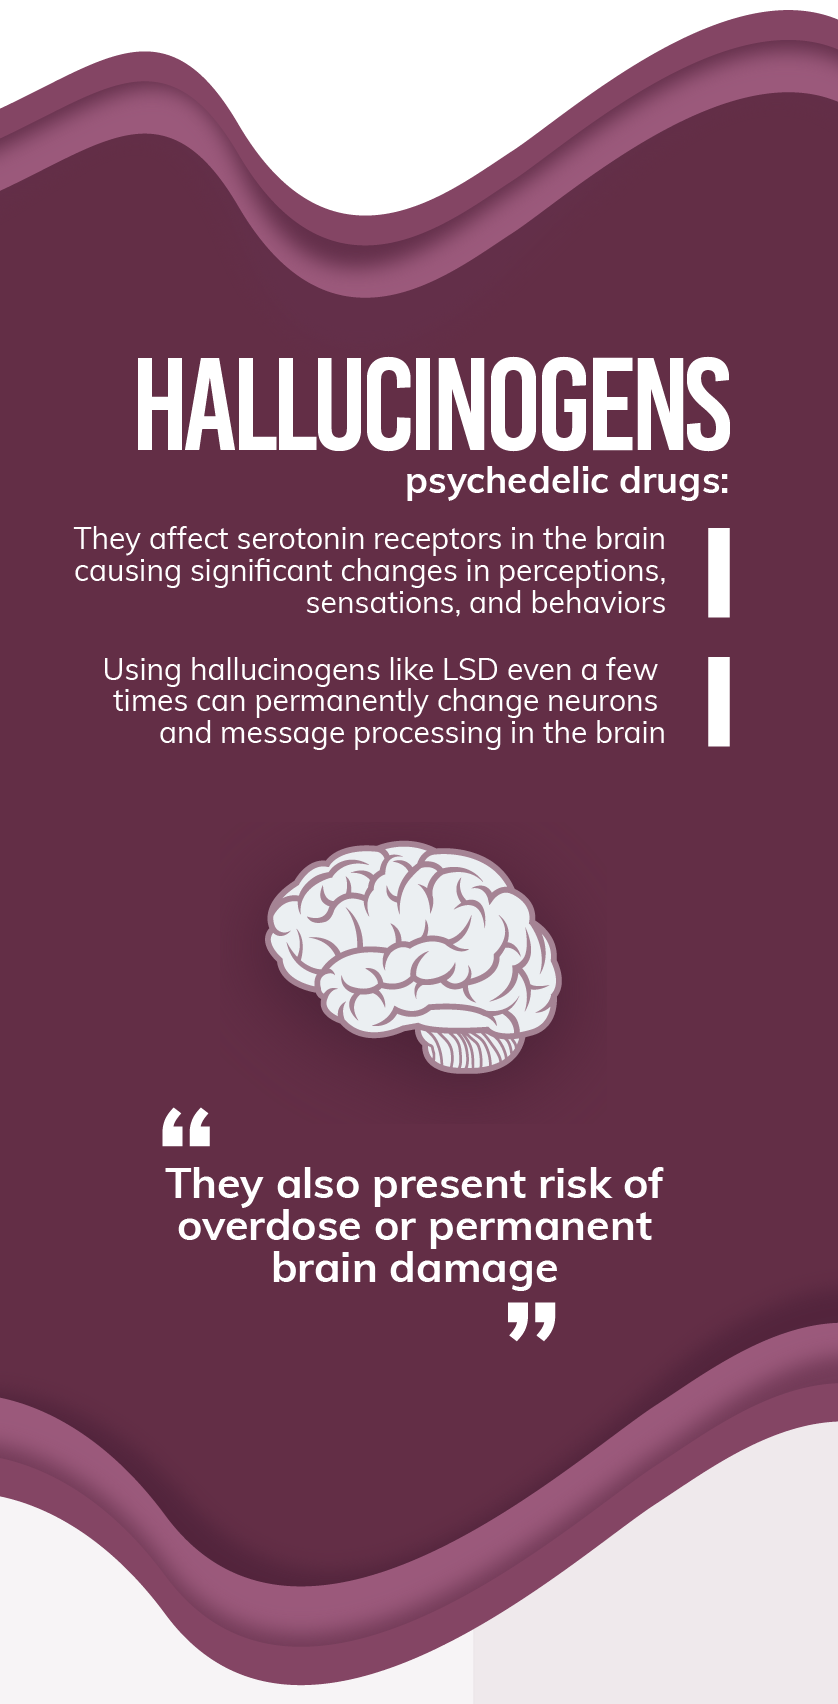 The short term effects of the drugs on the body are, heightened risk of stroke or heart attack, panic attacks, severe drowsiness or wakefulness, changes to heart rate abd blood pressure, escalation of harmful behaviors and dangerous sexual practices, unhealthy changes in appetite and overdose or death. The long tern effects of the drugs on the body are, impairment or disease in the liver and kidneys, hormonal changes, lung or heart disease, cancer, HIV, hepatitis and other transferable diseases and neurological changes.